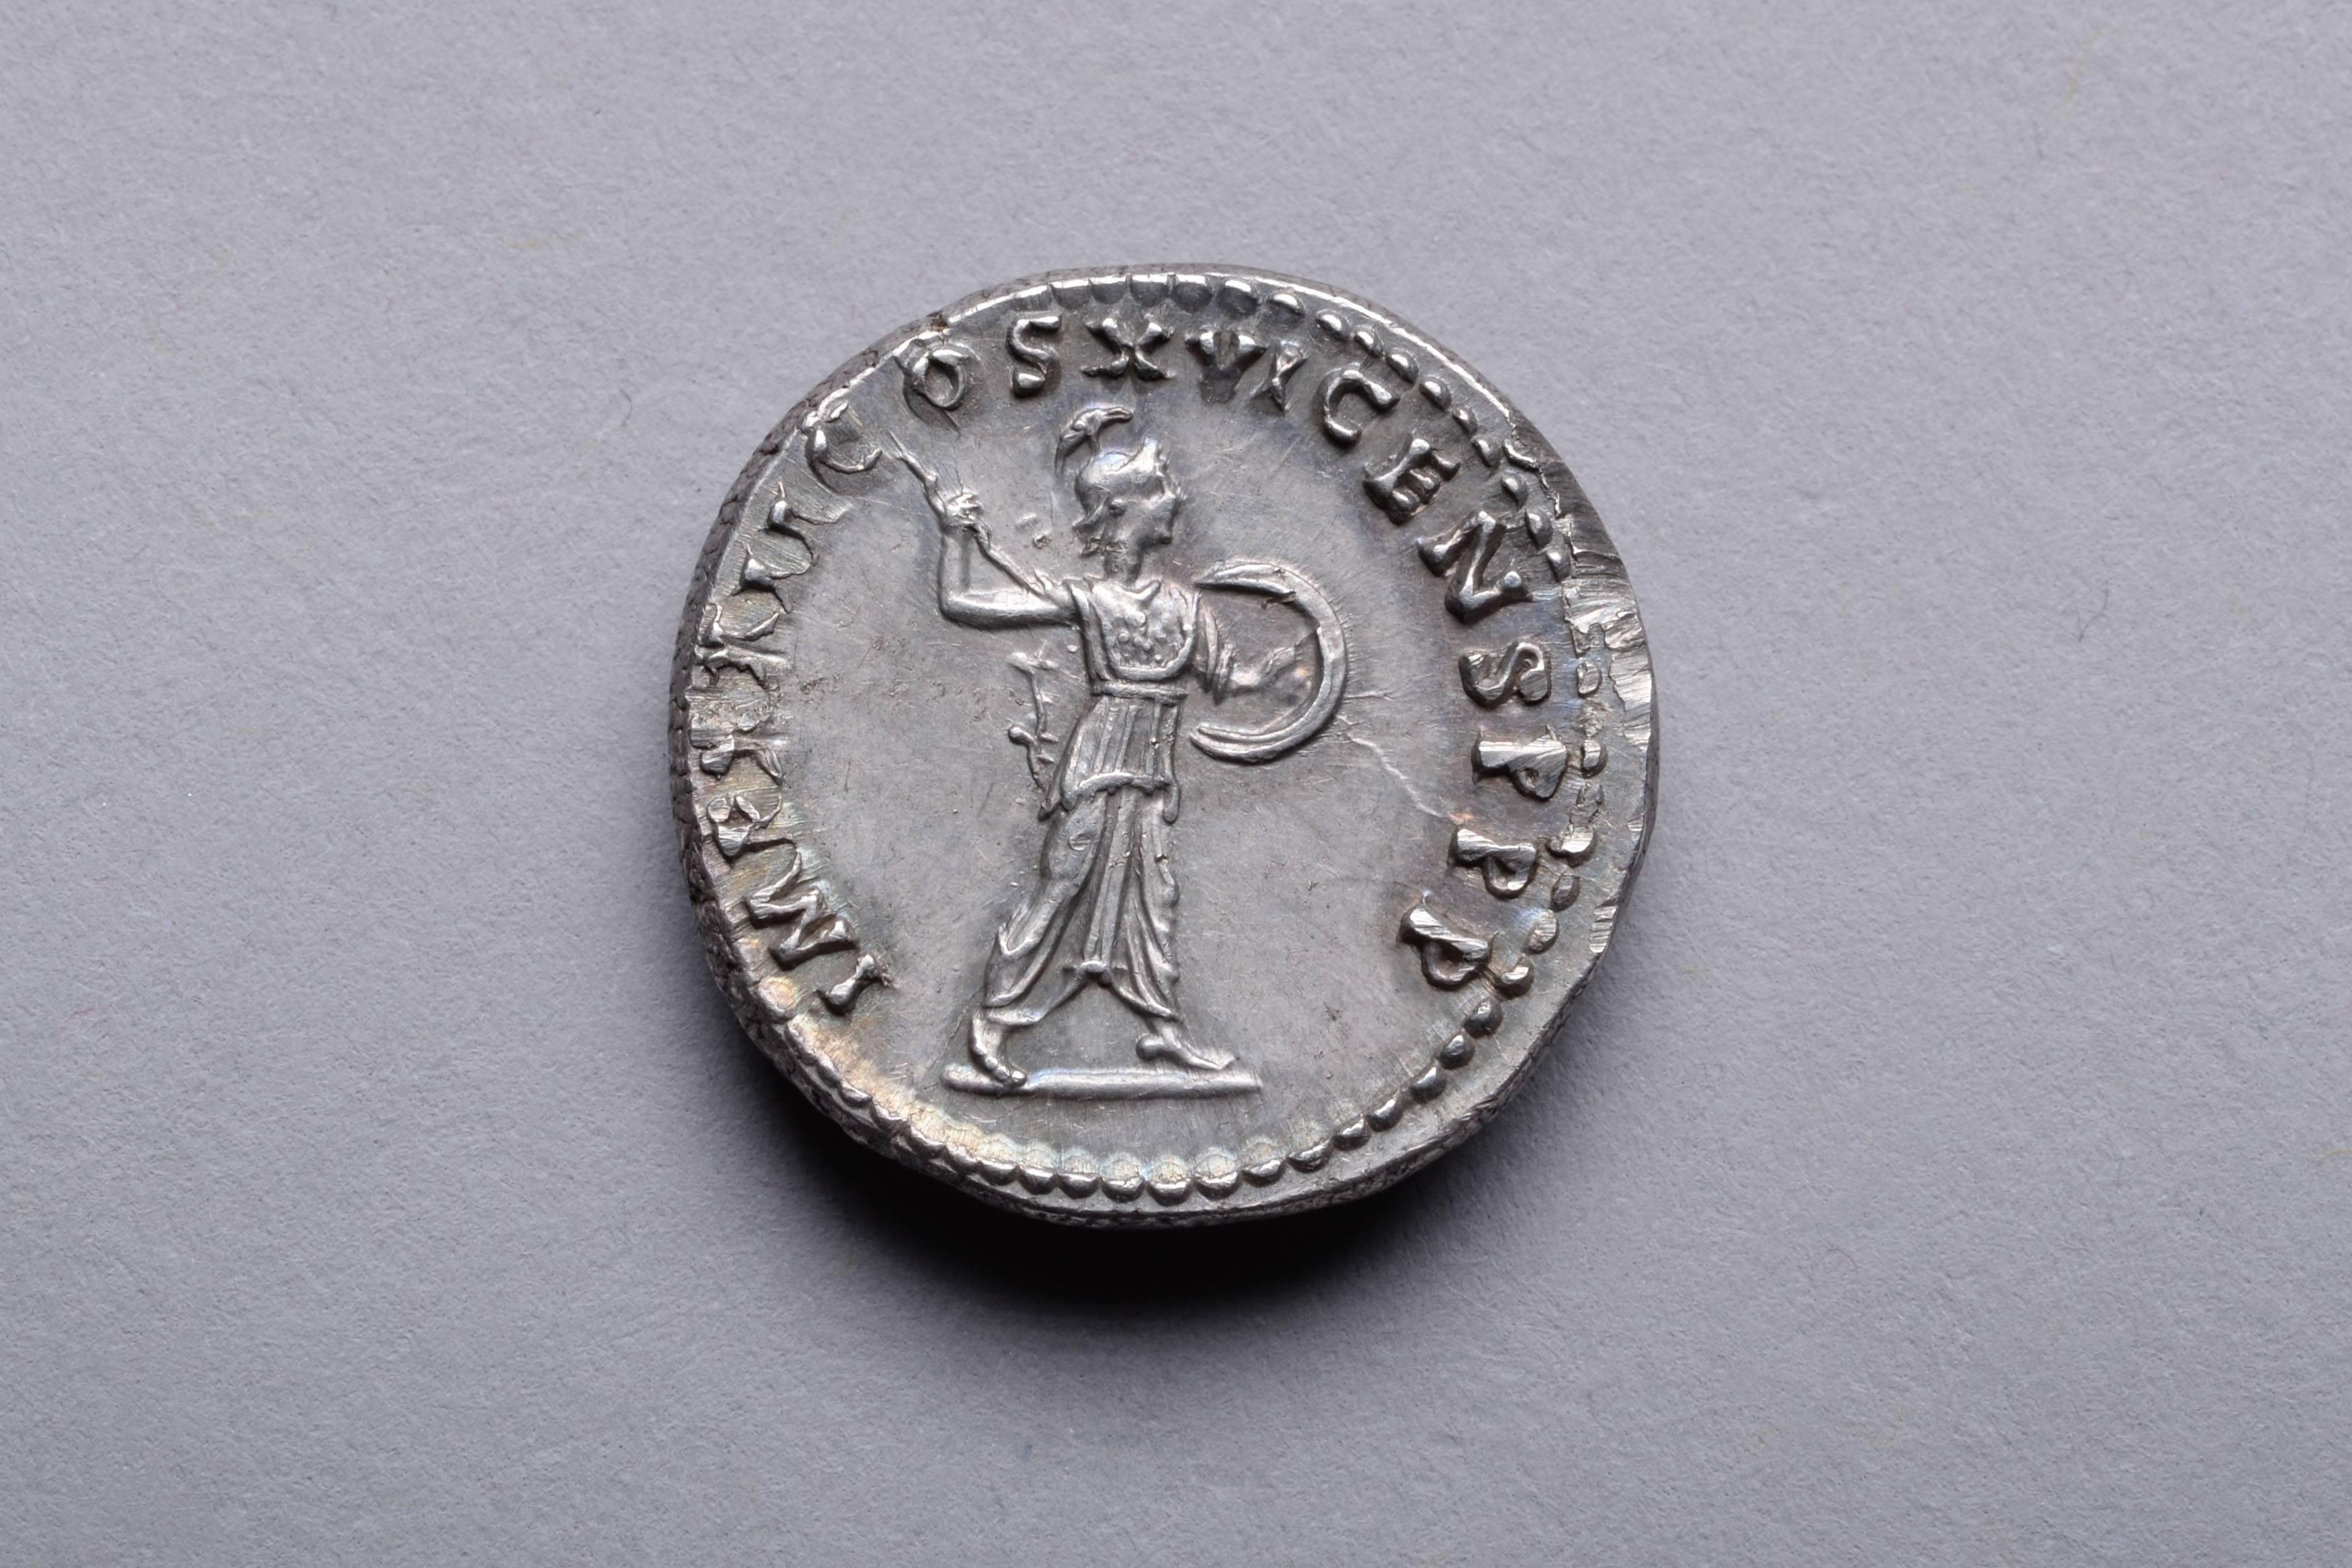 A superb example of ancient Roman silver denarius, minted under Emperor Domitian (Titus Flavius Caesar Domitianus Augustus). Struck at the Rome mint, in 92 or 93 AD.

The obverse with a fantastic portrait bust of Domitian. He is shown facing right